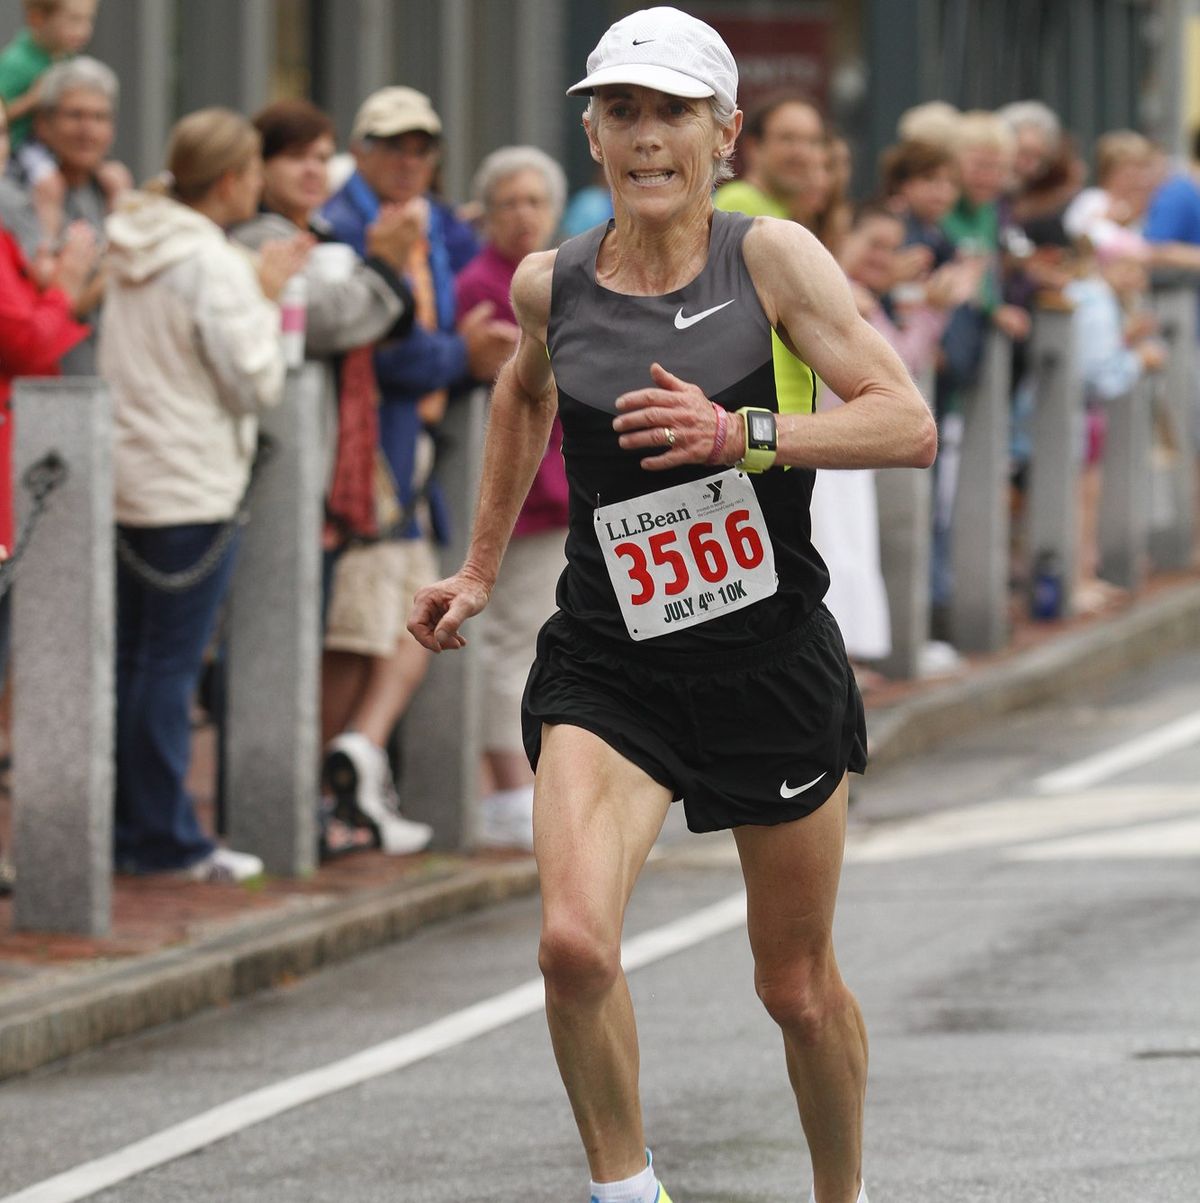 Joan Benoit Samuelson of Freeport finishes strong in fourth among women during the LL Bean 10K Road